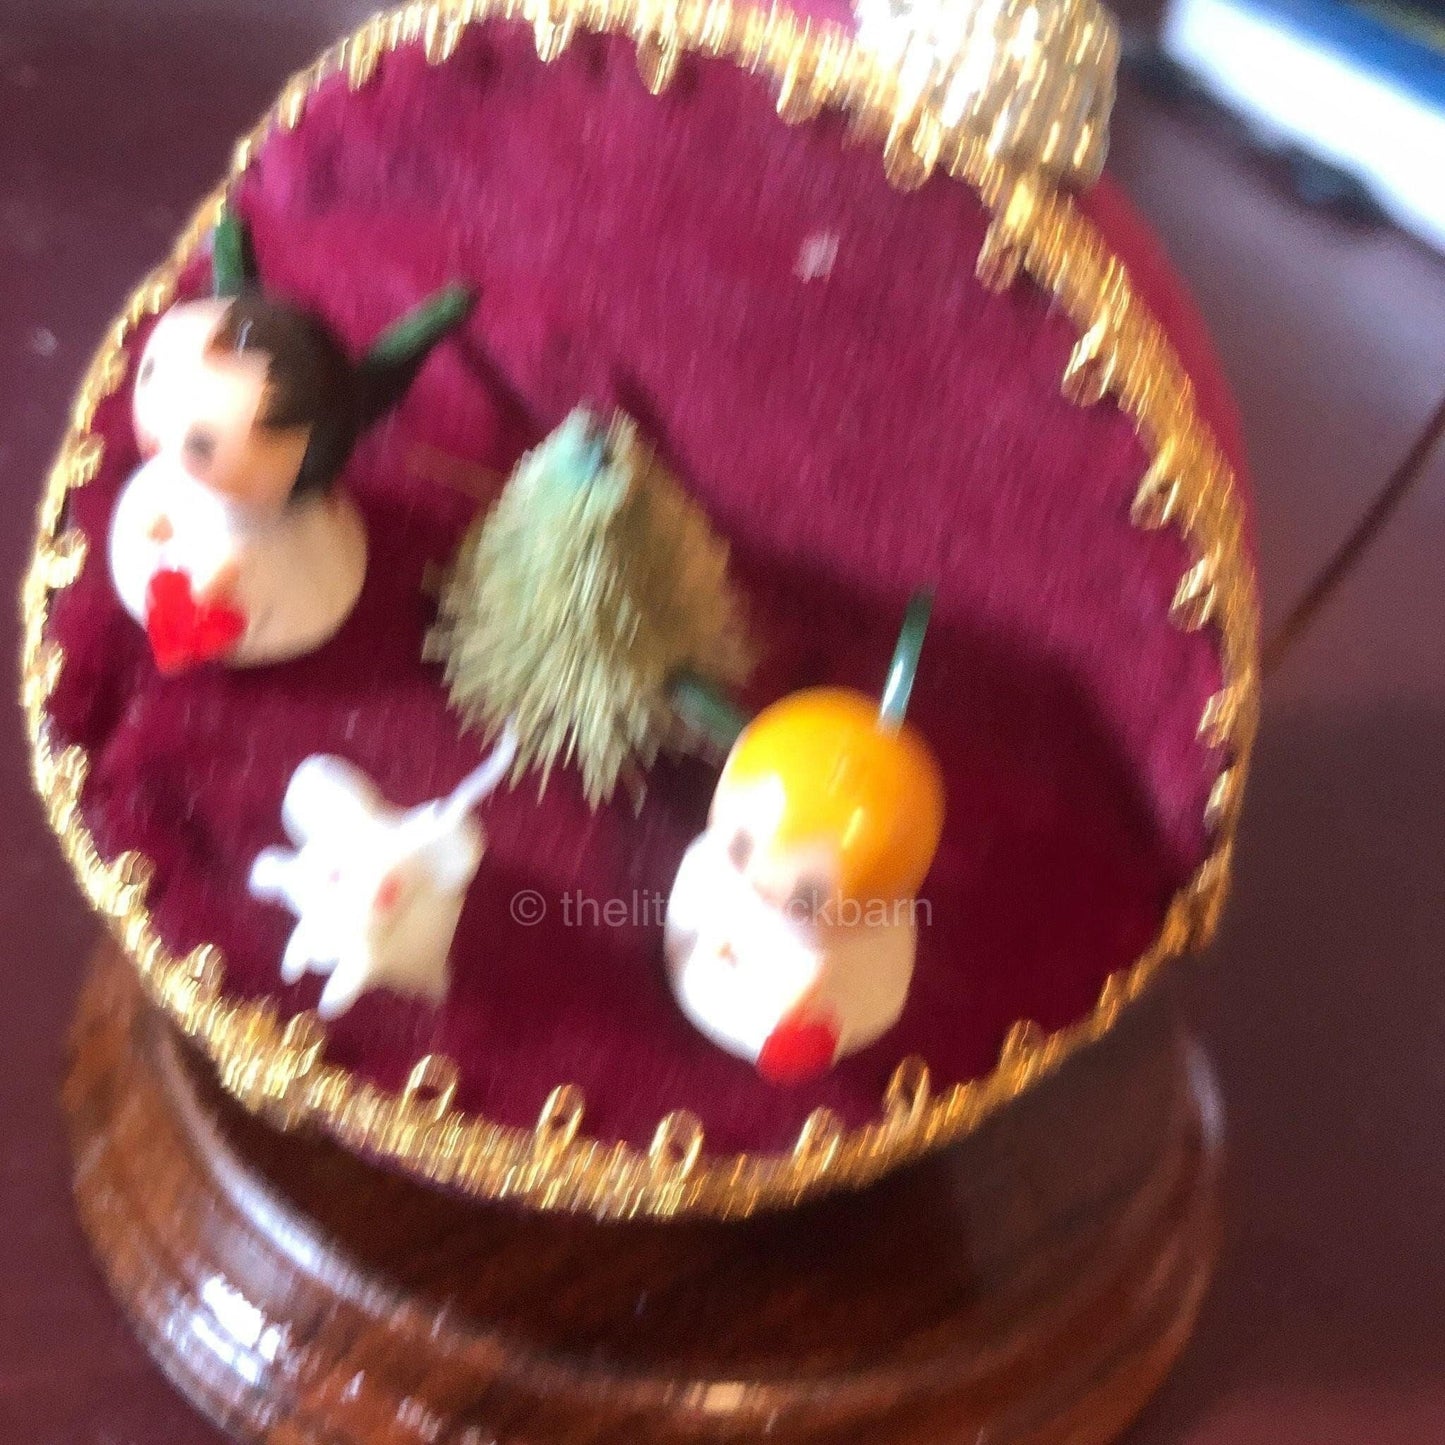 Velveteen Ball Ornament, with 2 Angels a Mouse and a Christmas Tree, Christmas*